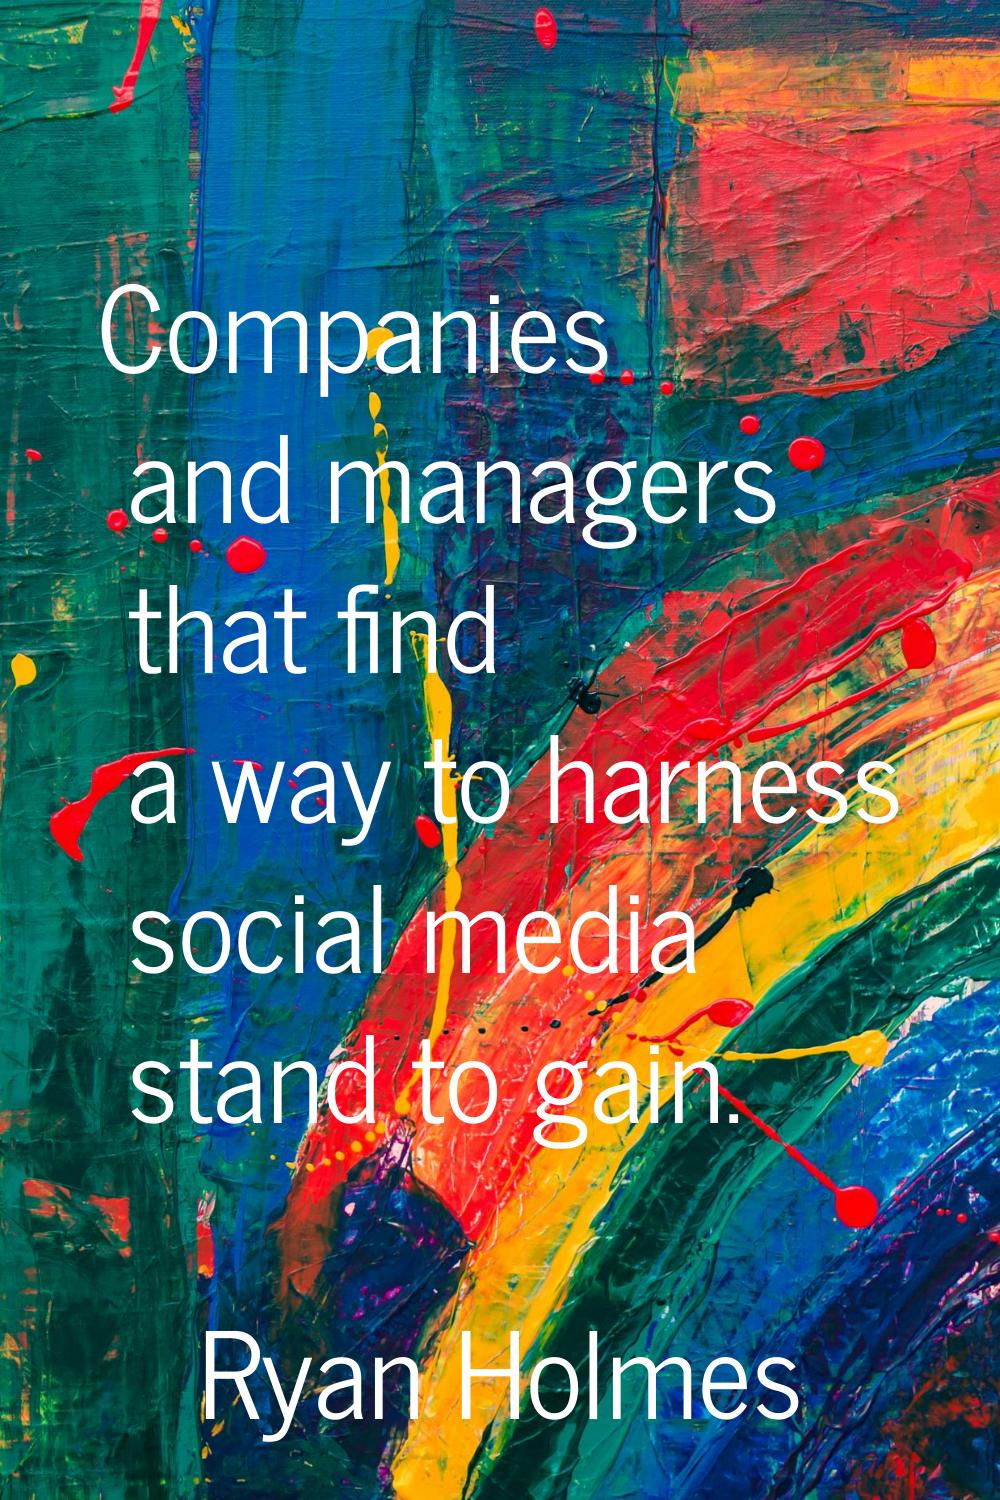 Companies and managers that find a way to harness social media stand to gain.